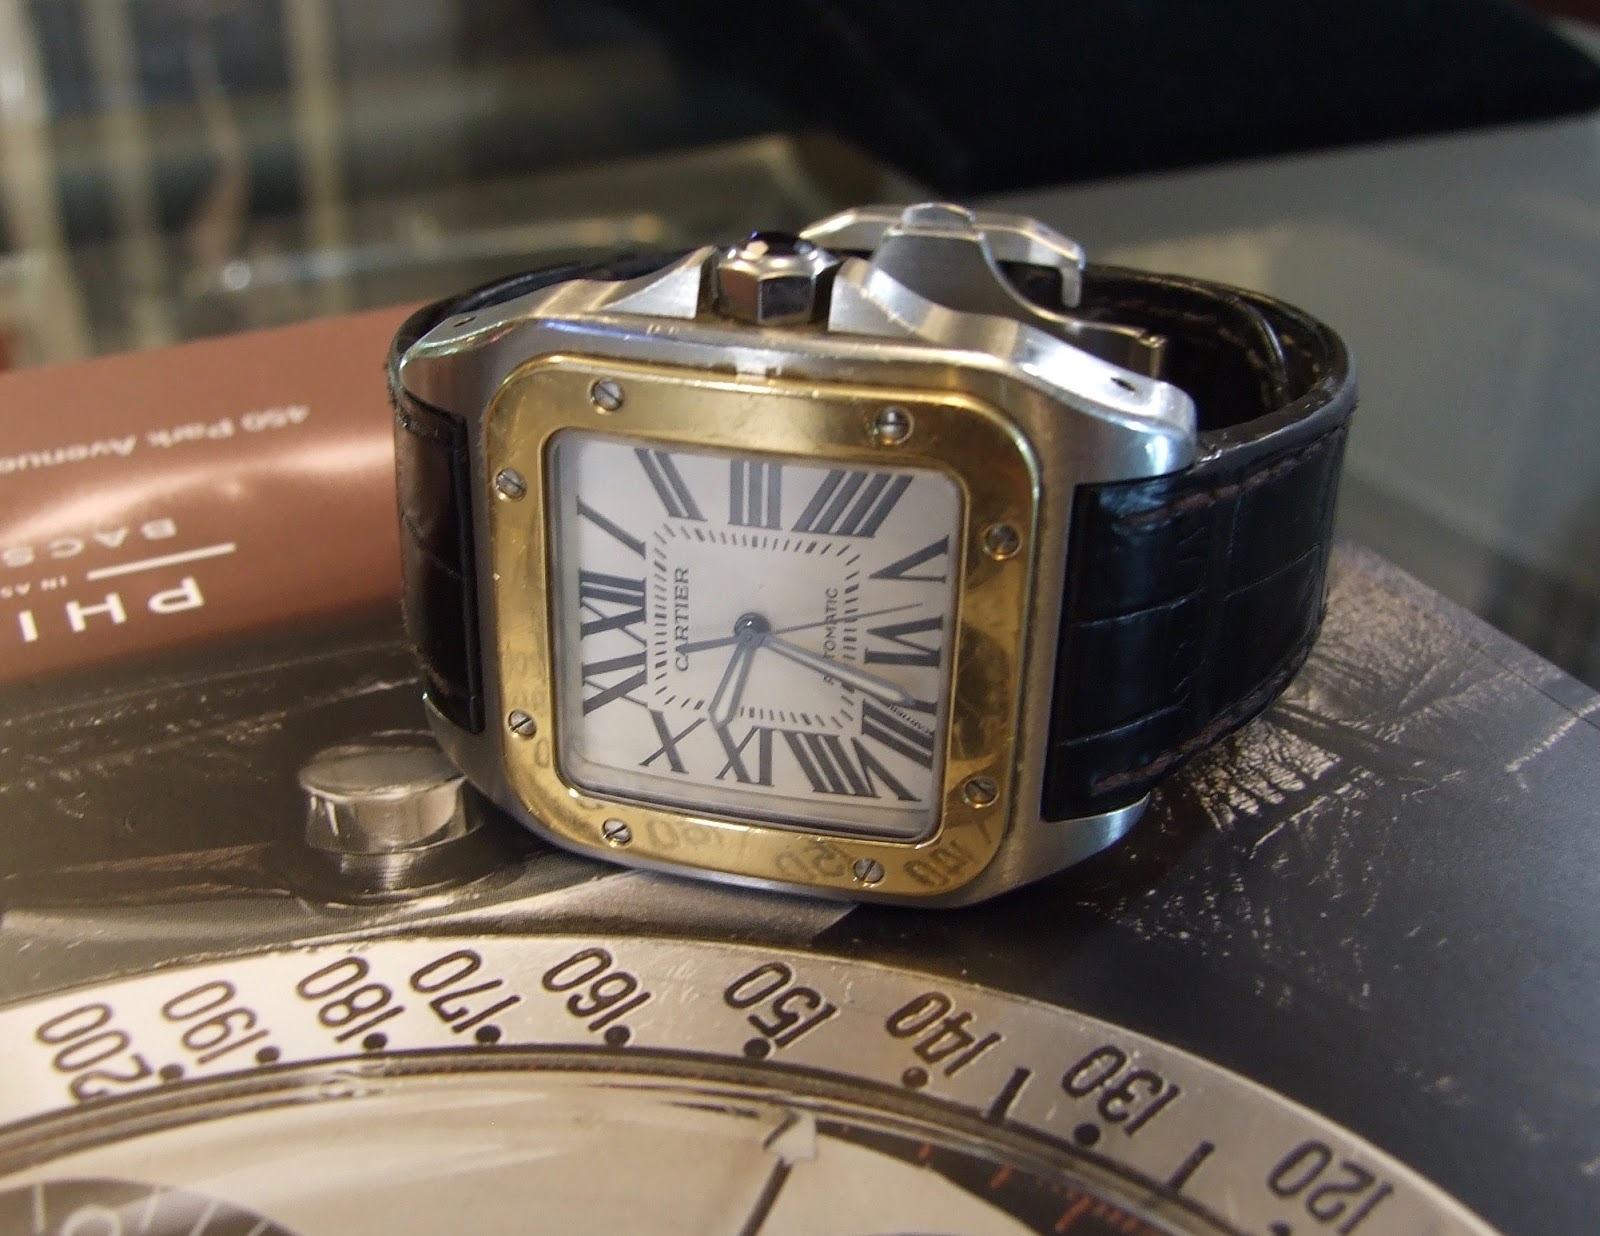 used cartier watches toronto